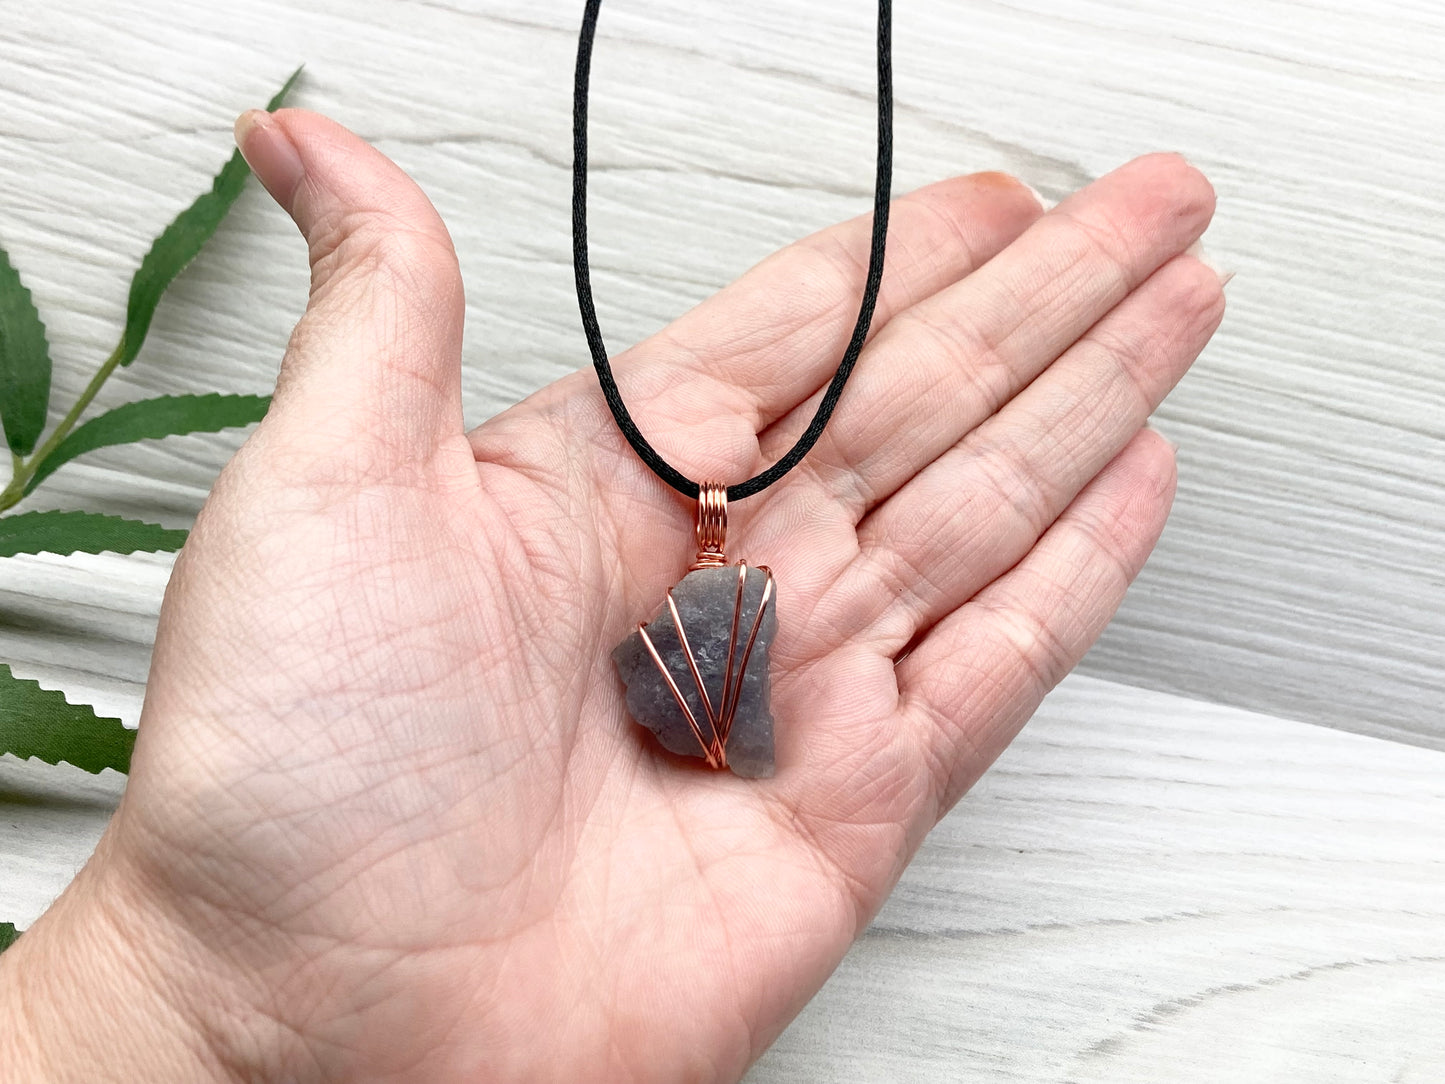 Raw Iolite Necklace. Natural Iolite Crystal Wrapped With Pure Copper Wire.This Stone Is A Blue Purple Color. Comes On A Black Chain. New Age Sagittarius Pendant.